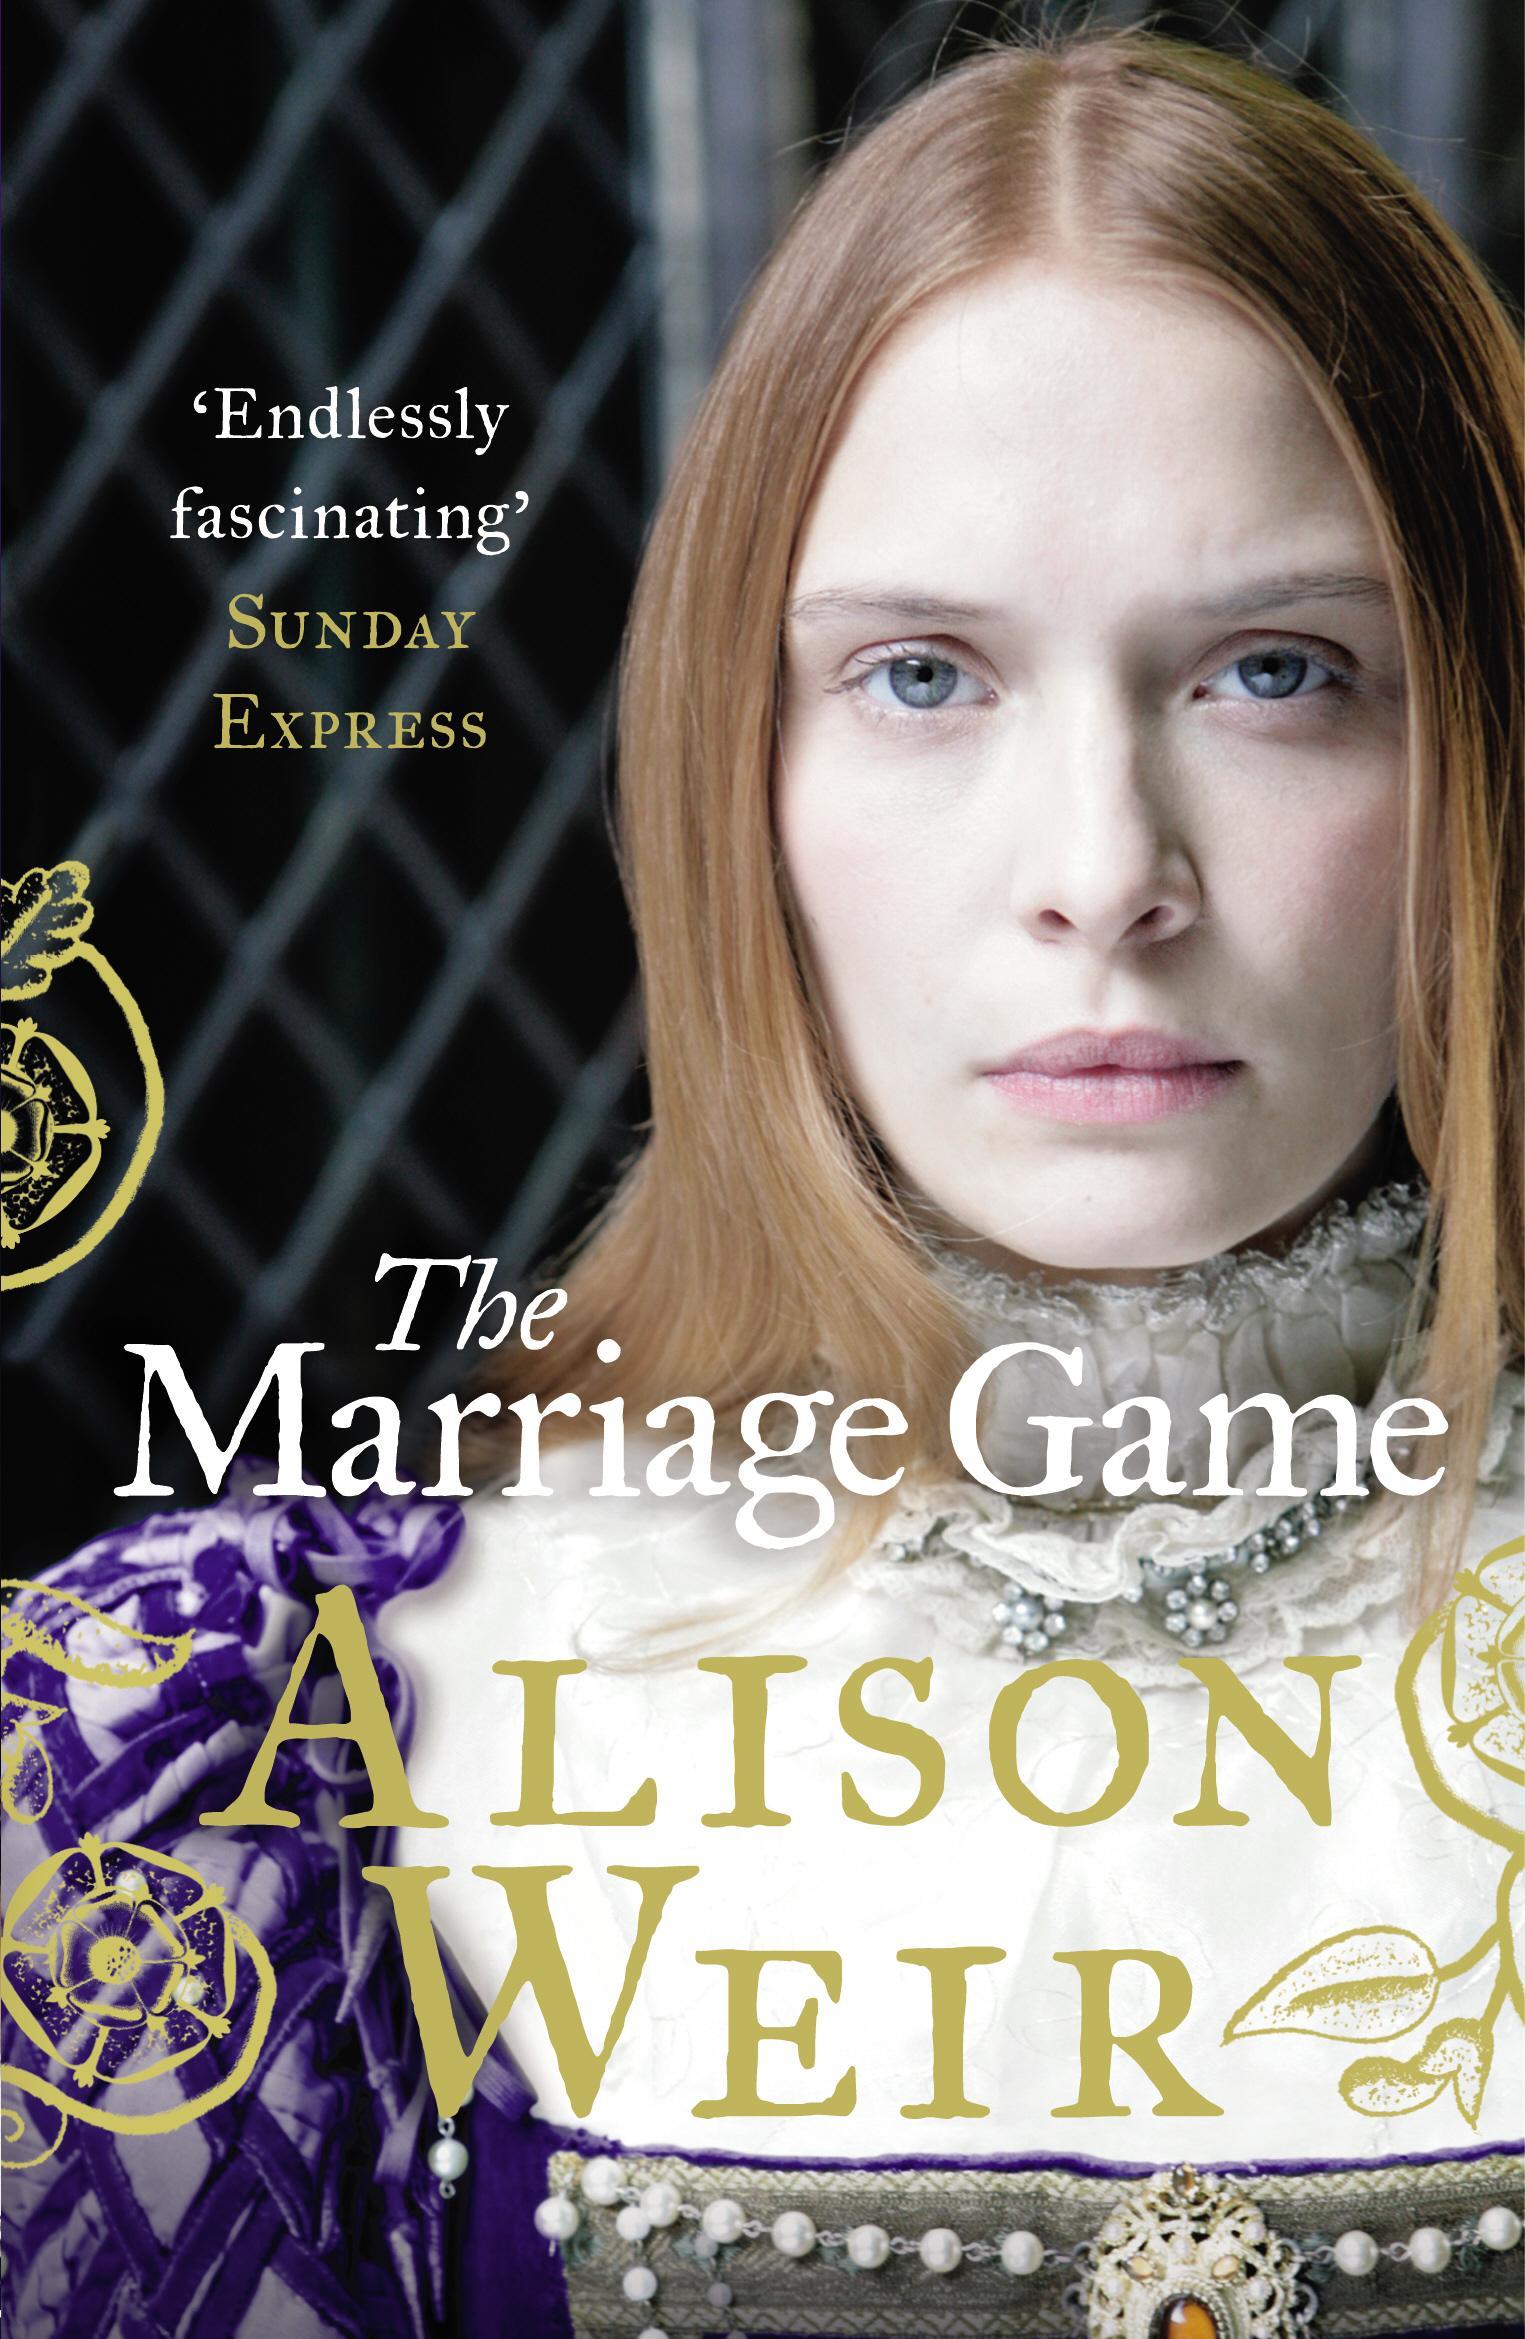 Marriage Game - Alison Weir